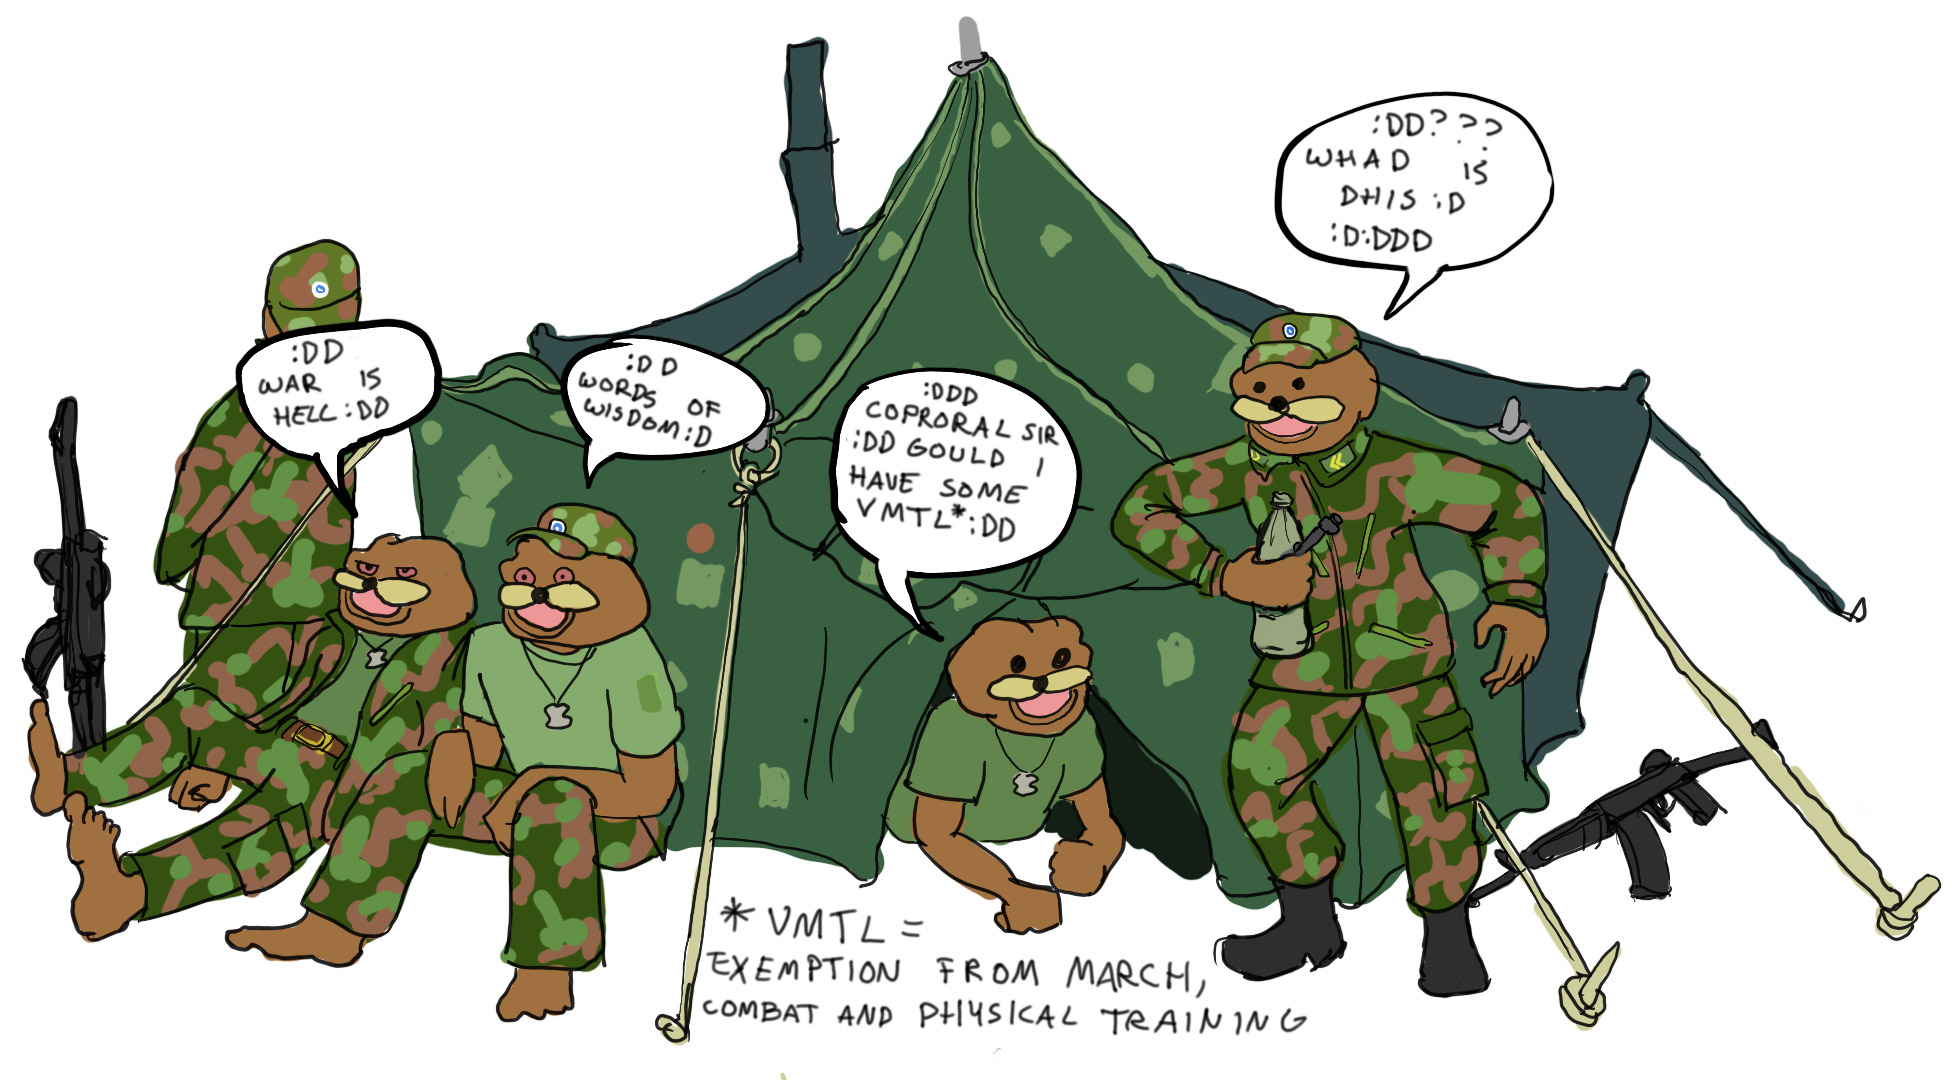 A meme depicting five soldiers at their tent. -War is hell. -Words of wisdom.-Corporal sir, gould I have some VMTL (exemption from march, combat and physical training). -Whad is dhis?